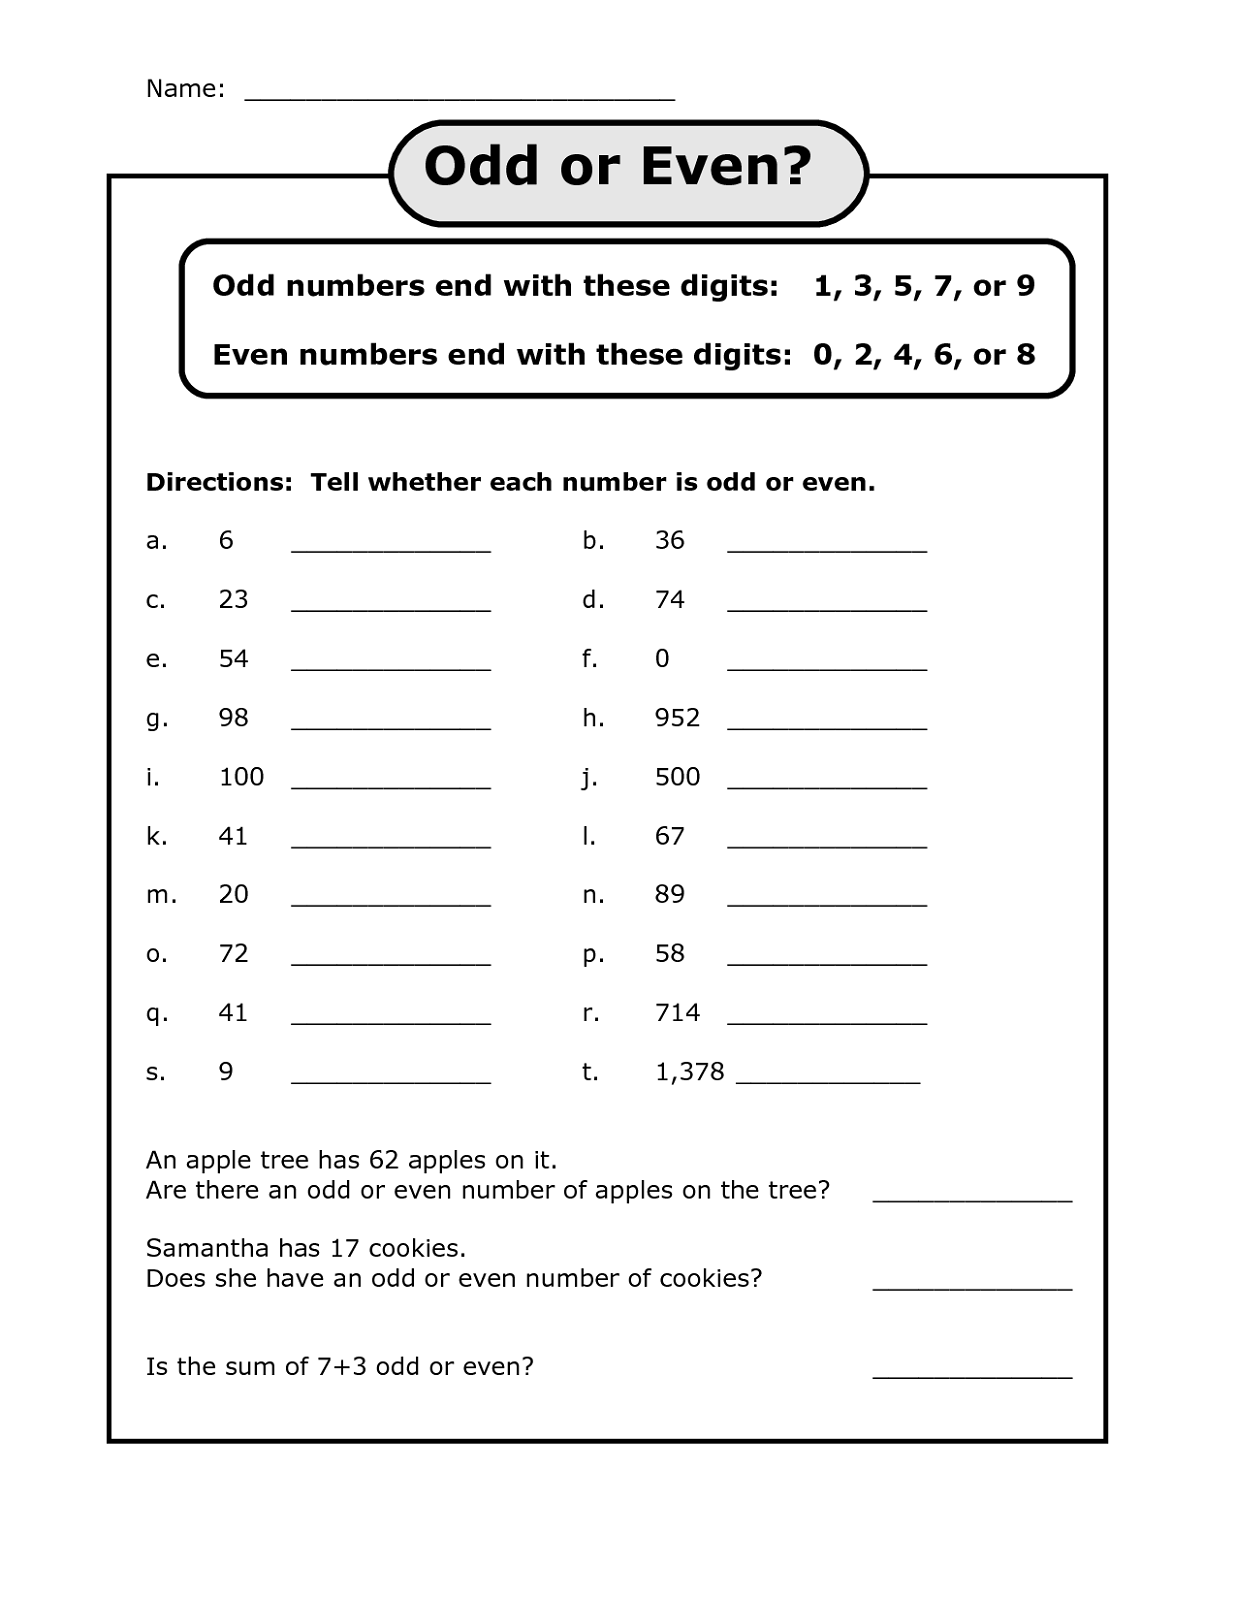 odd-and-even-worksheet-new